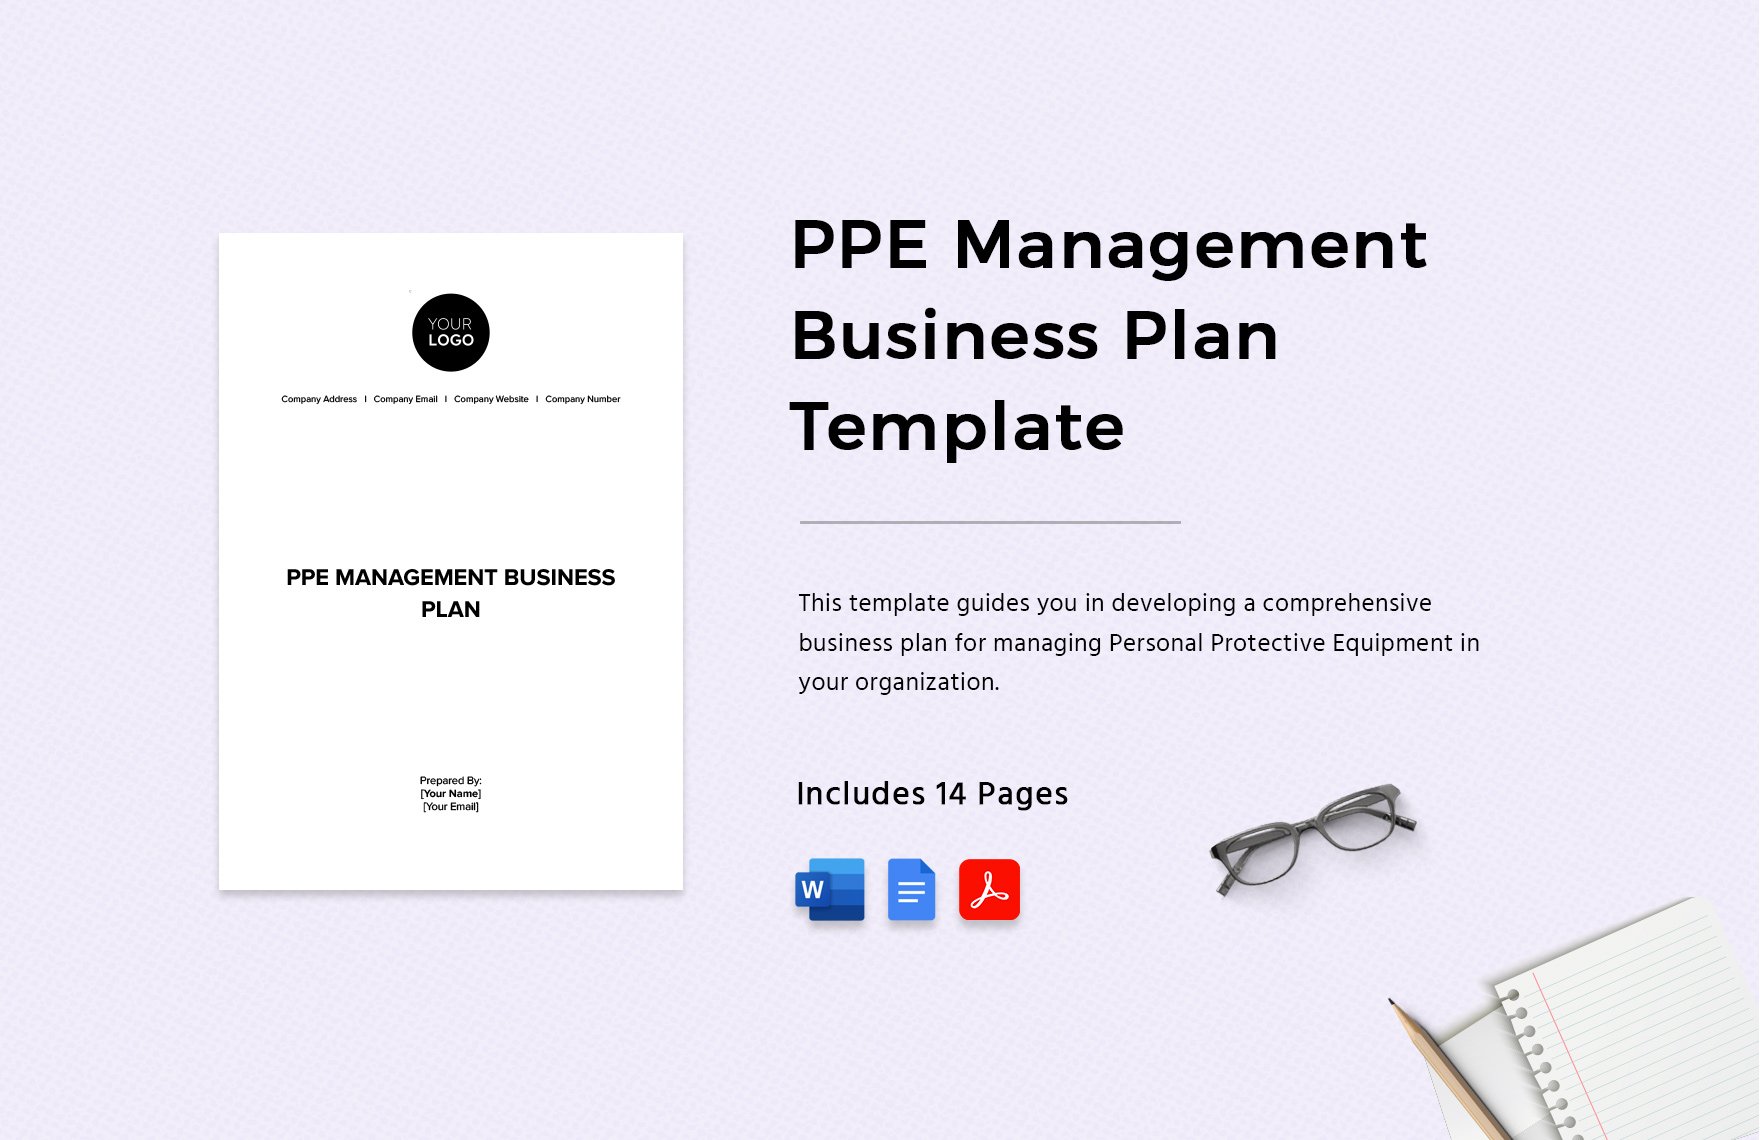 PPE Management Business Plan Template